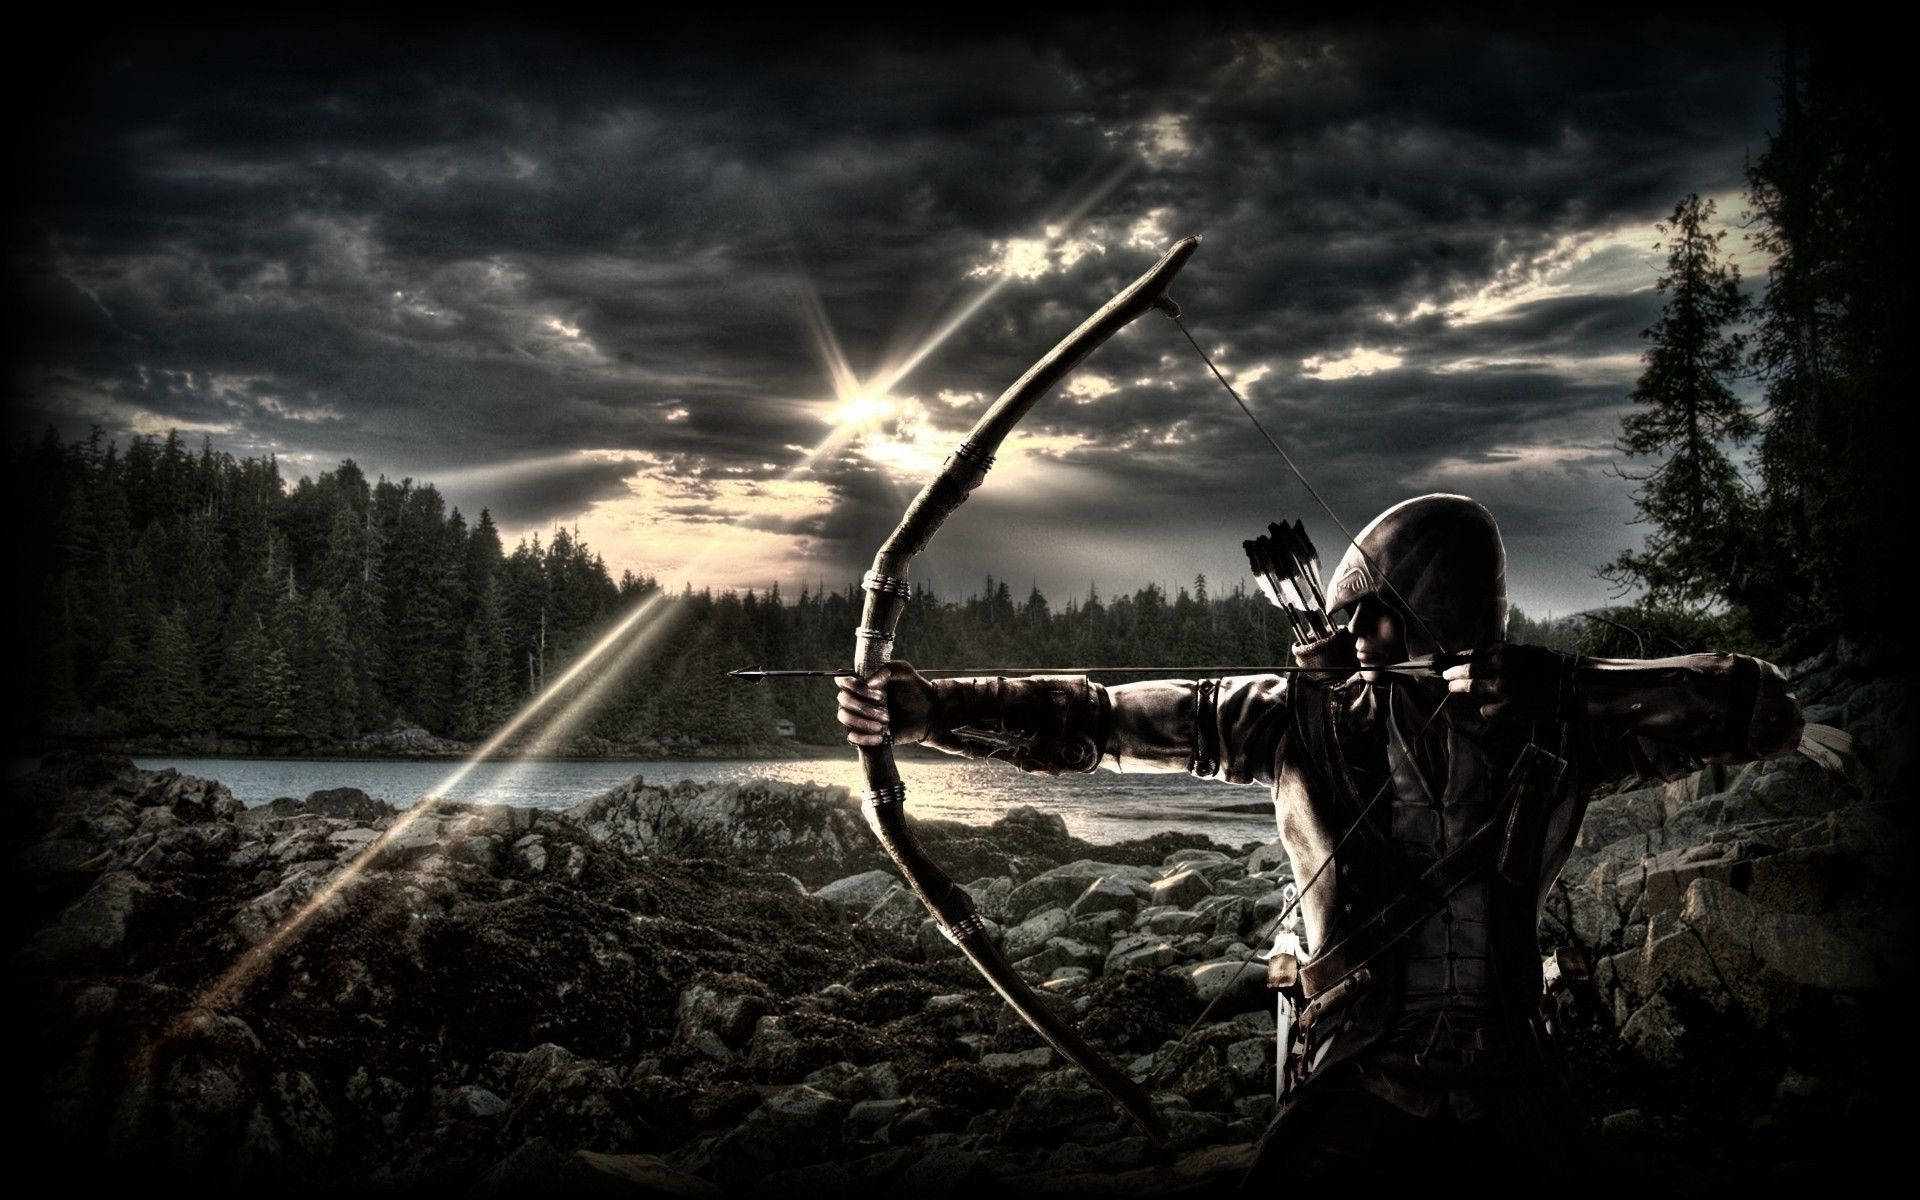 Free Archery Wallpaper Downloads, [100+] Archery Wallpapers for FREE |  